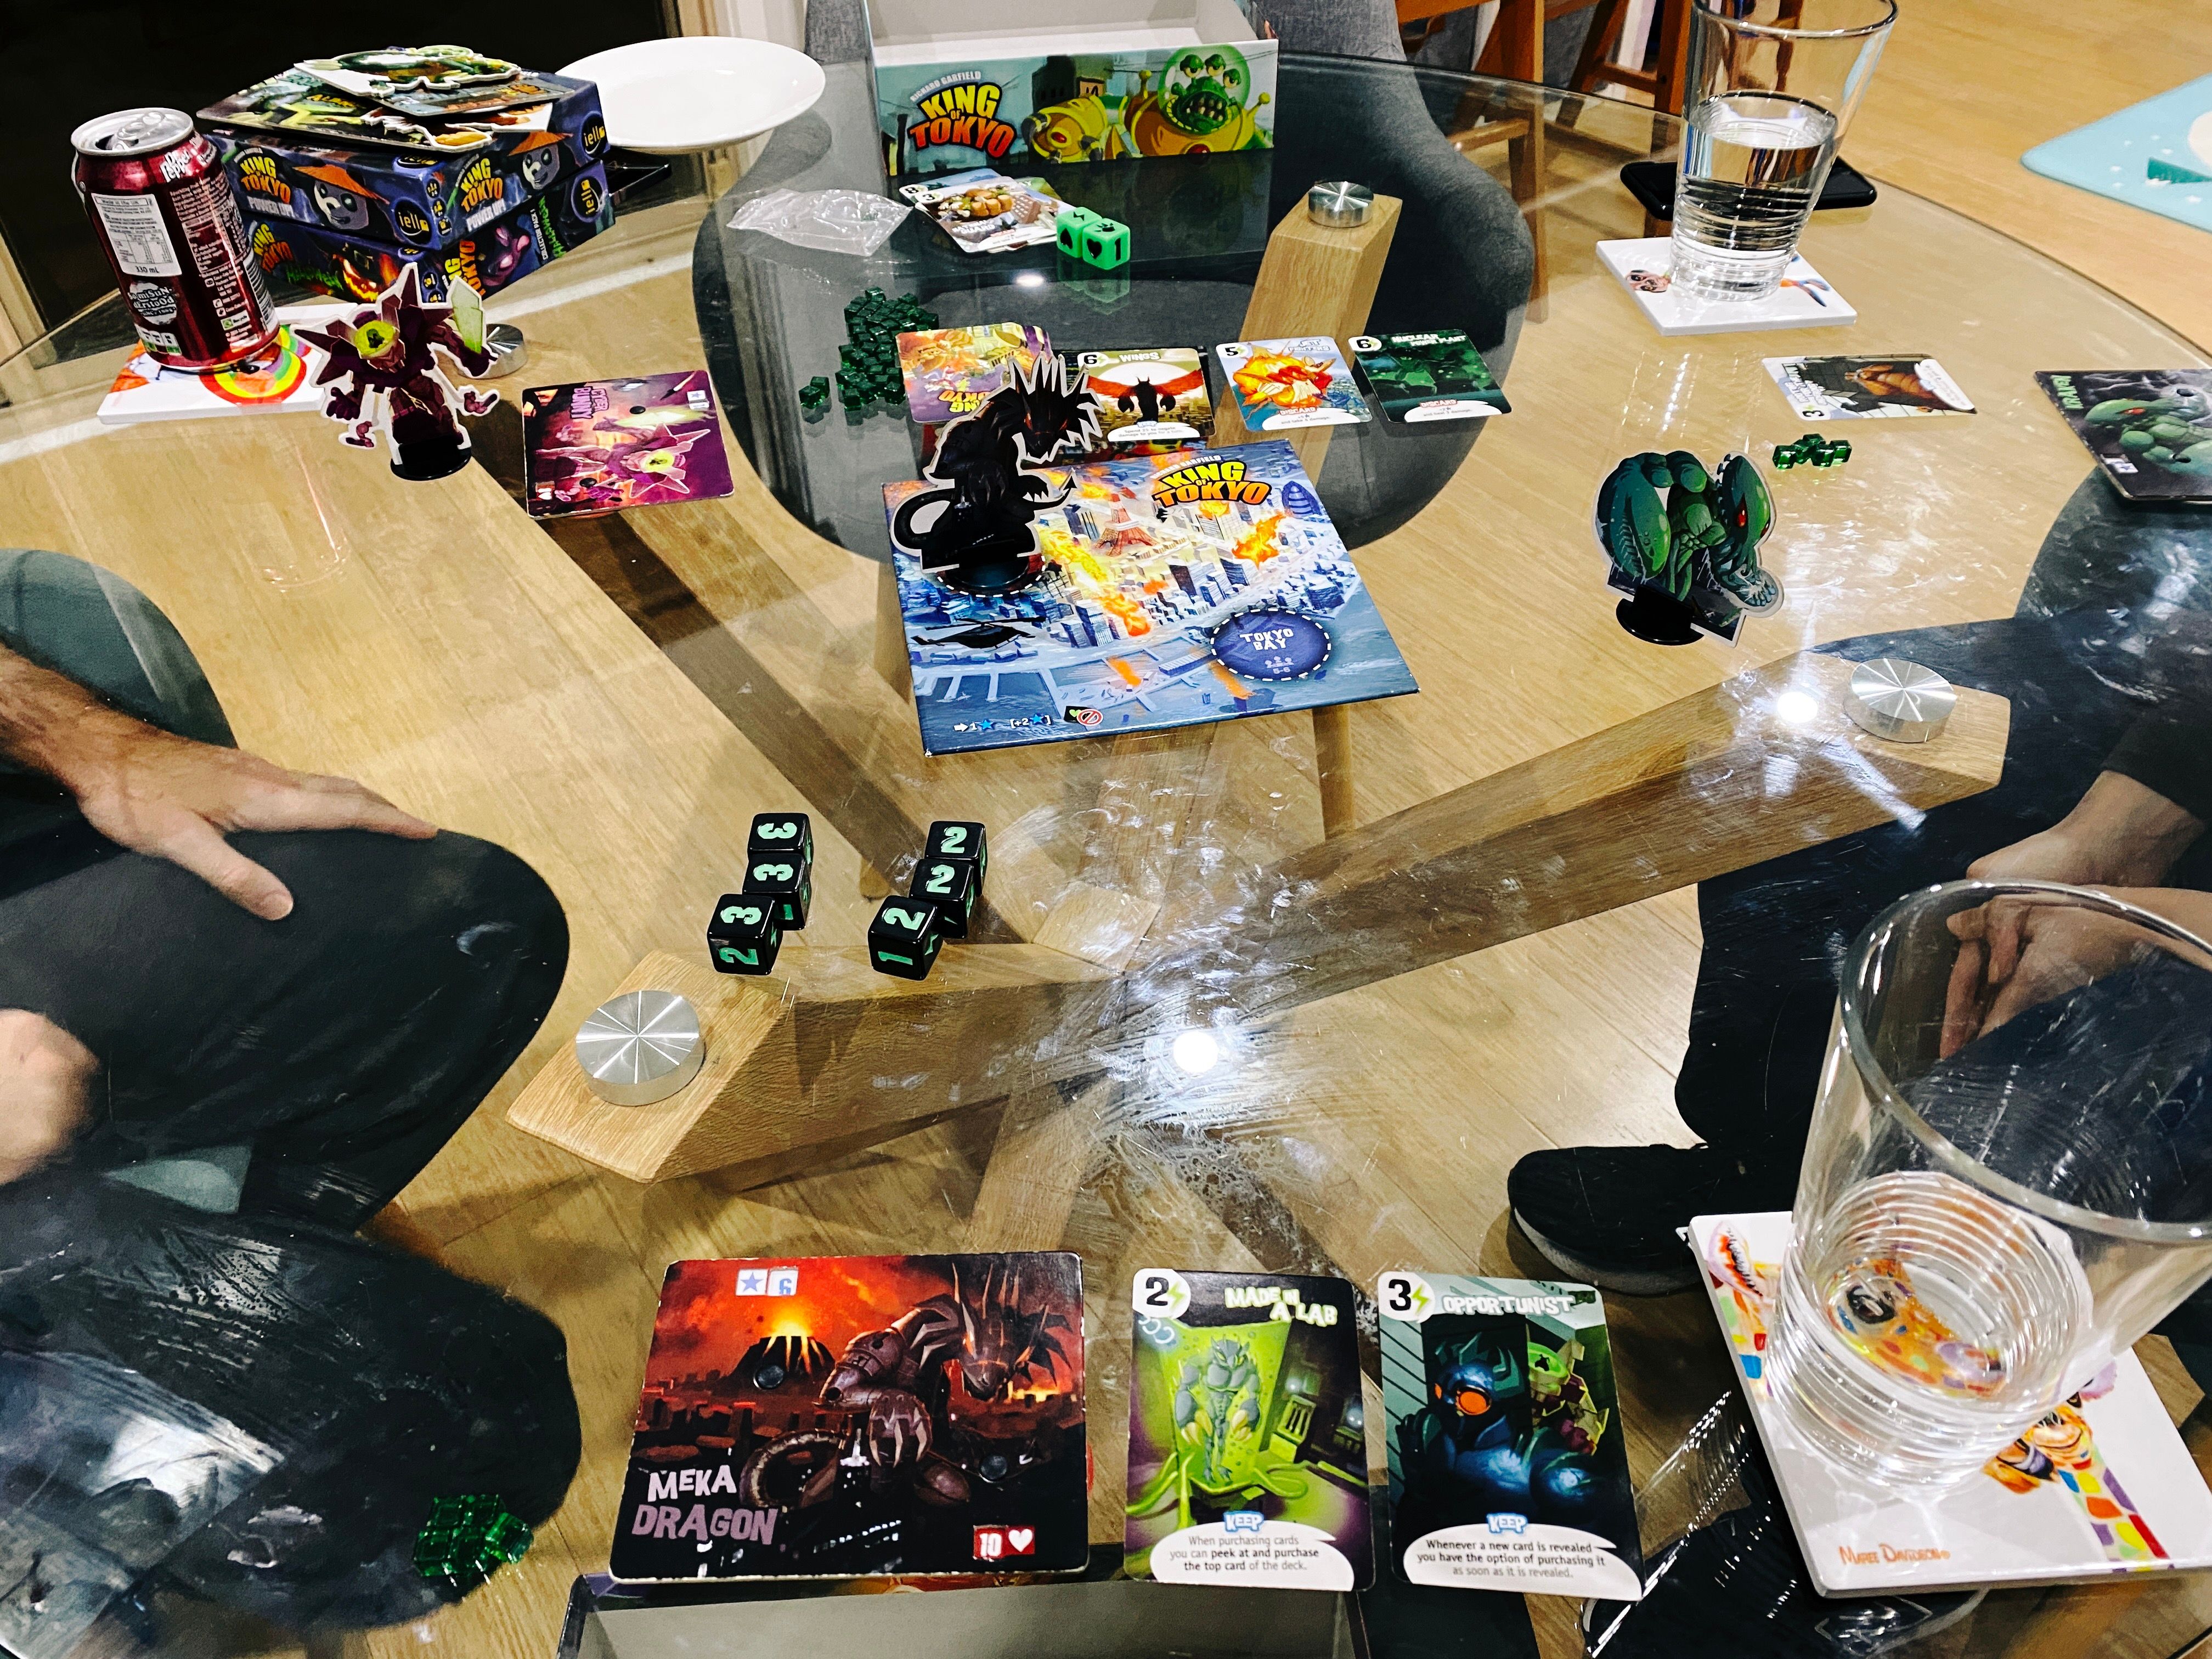 A photo of a game of King of Tokyo. This is much less involved, there's three cutouts of monsters standing upright and a small board with a cartoon version of the coastline of Tokyo and its buildings, plus a number of cards with cartoony artwork on them.